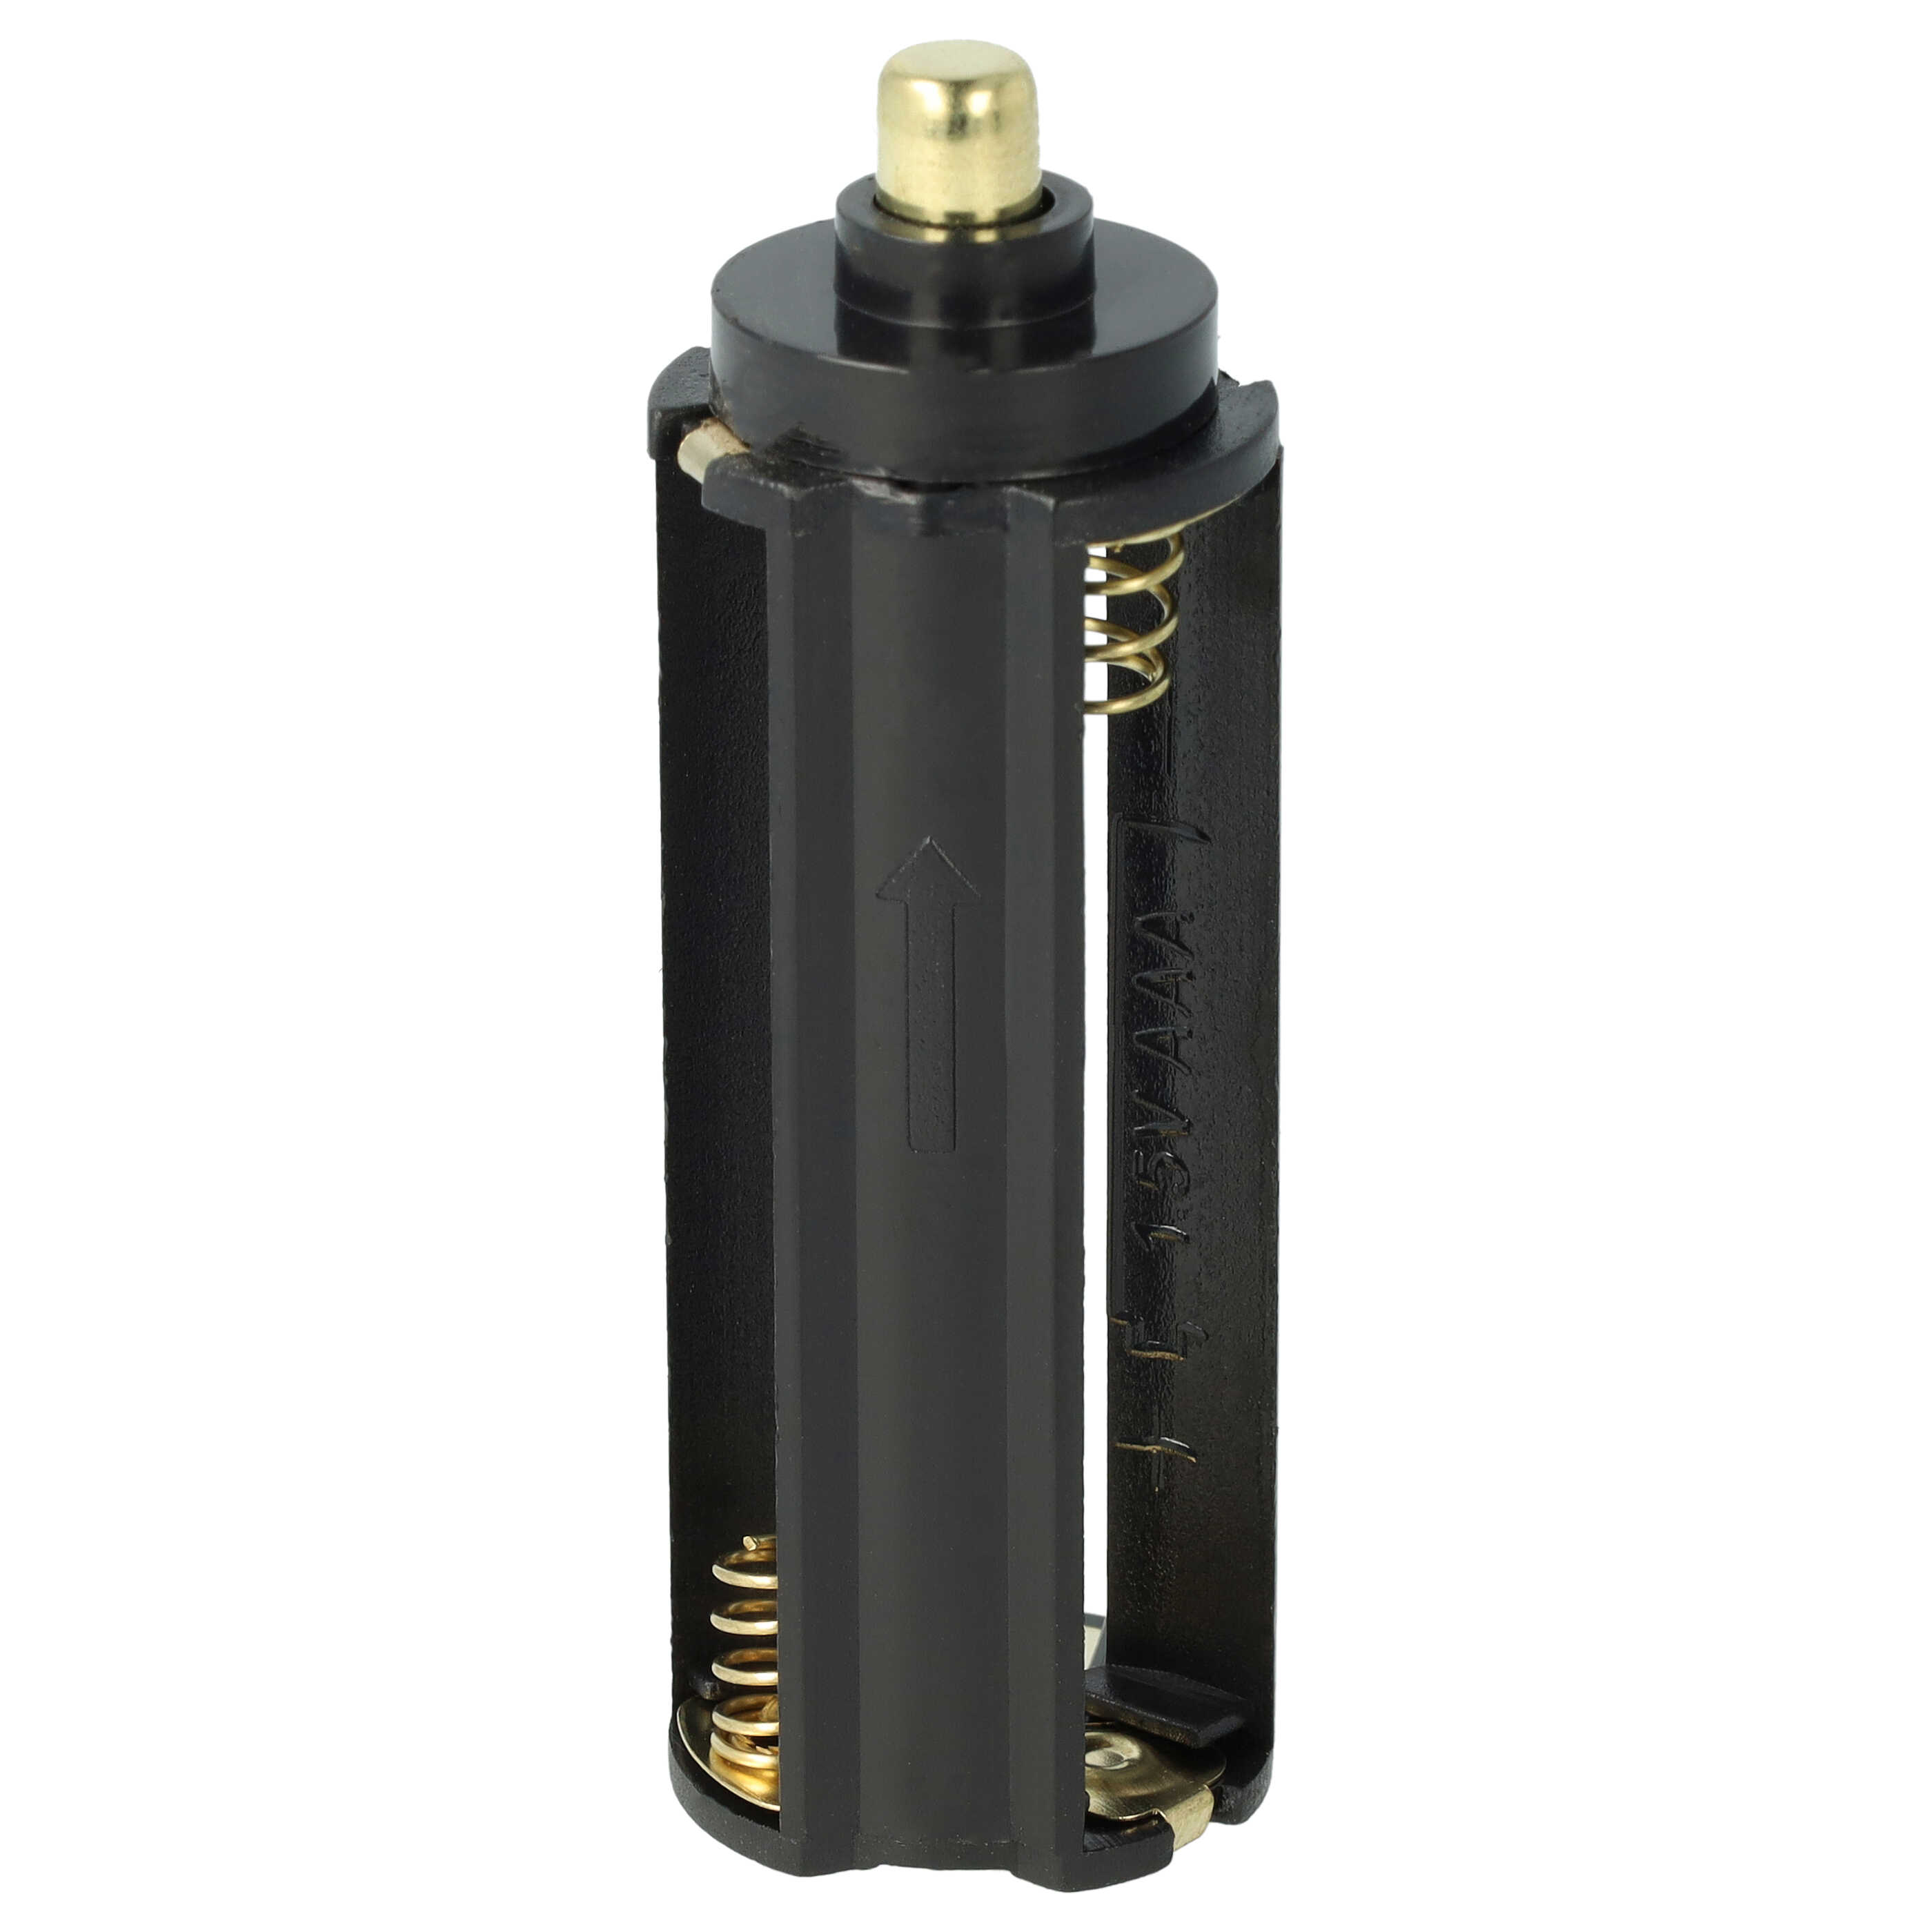 3 Micro / AAA Batteries to 18650 Cell Adapter suitable forTorches